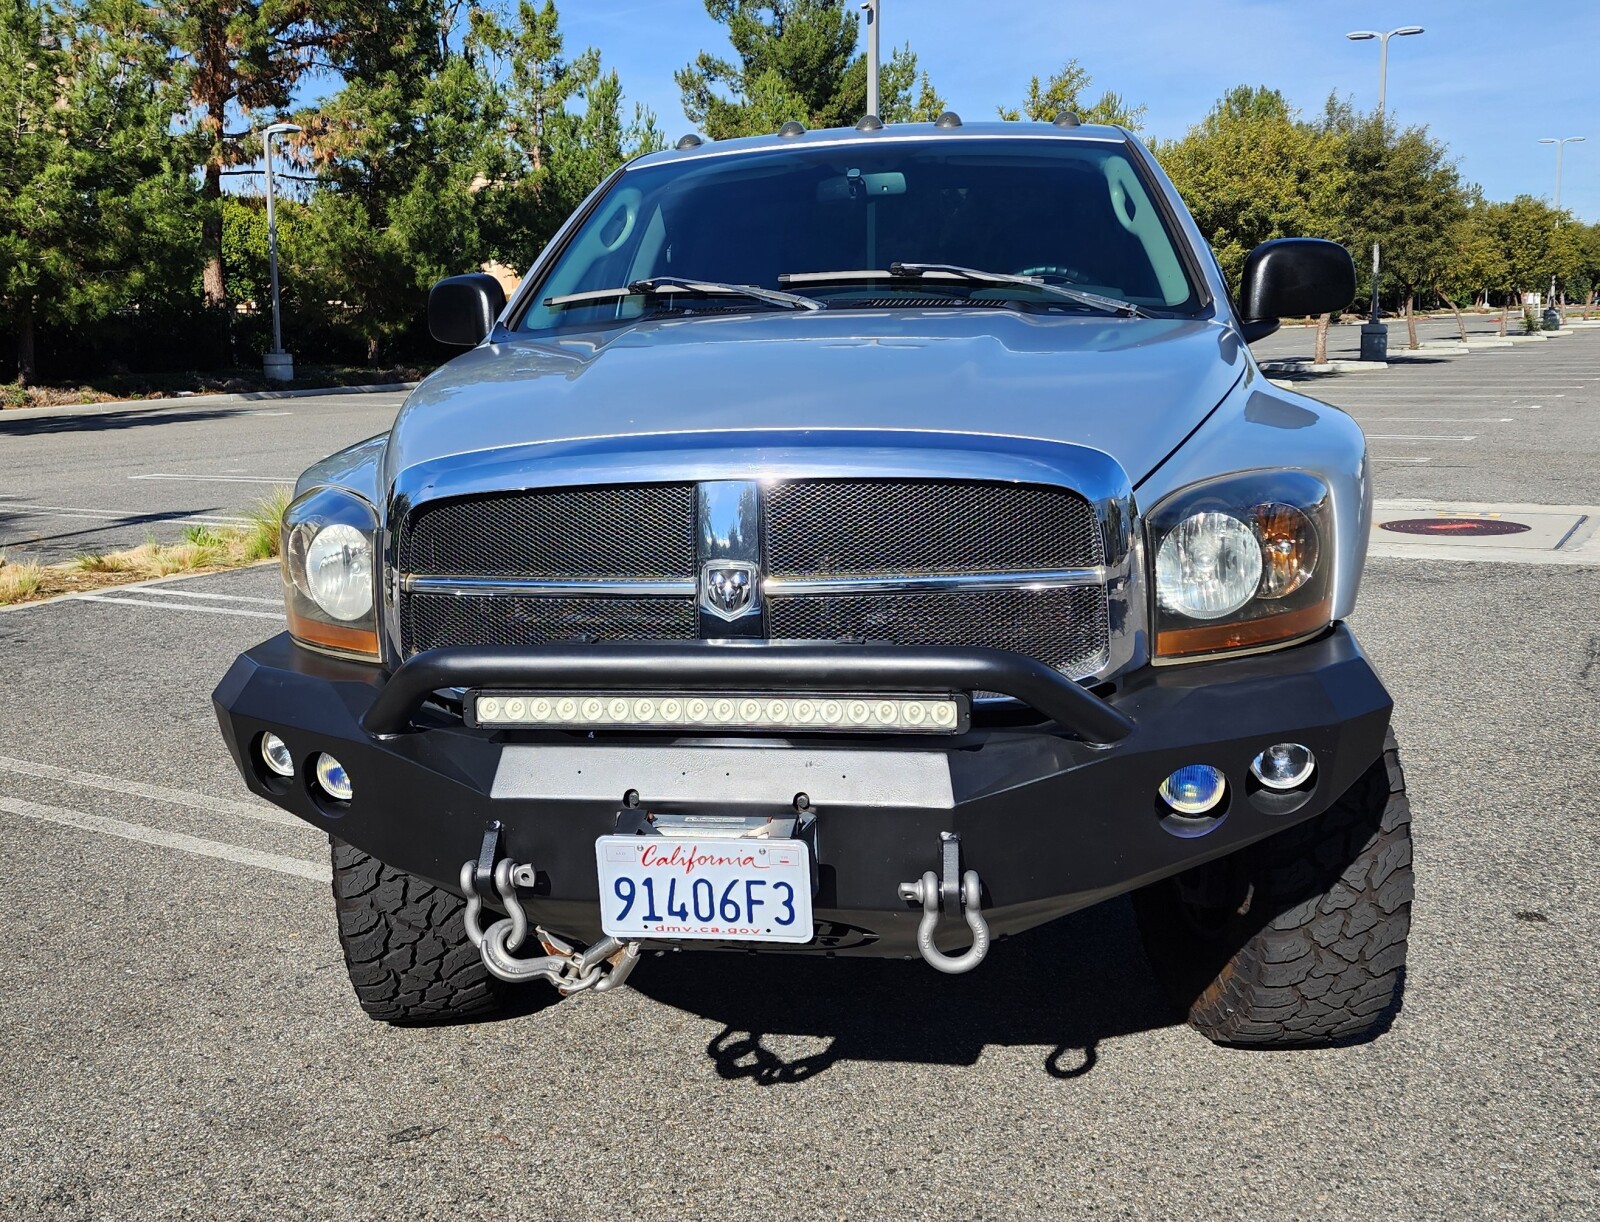 For Sale: *REDUCED* Clean 2006 Ram 1500 SLT 4x4 5.7L V8 | $20k+ UPGRADES | Well Maintained | Low Miles! - photo0